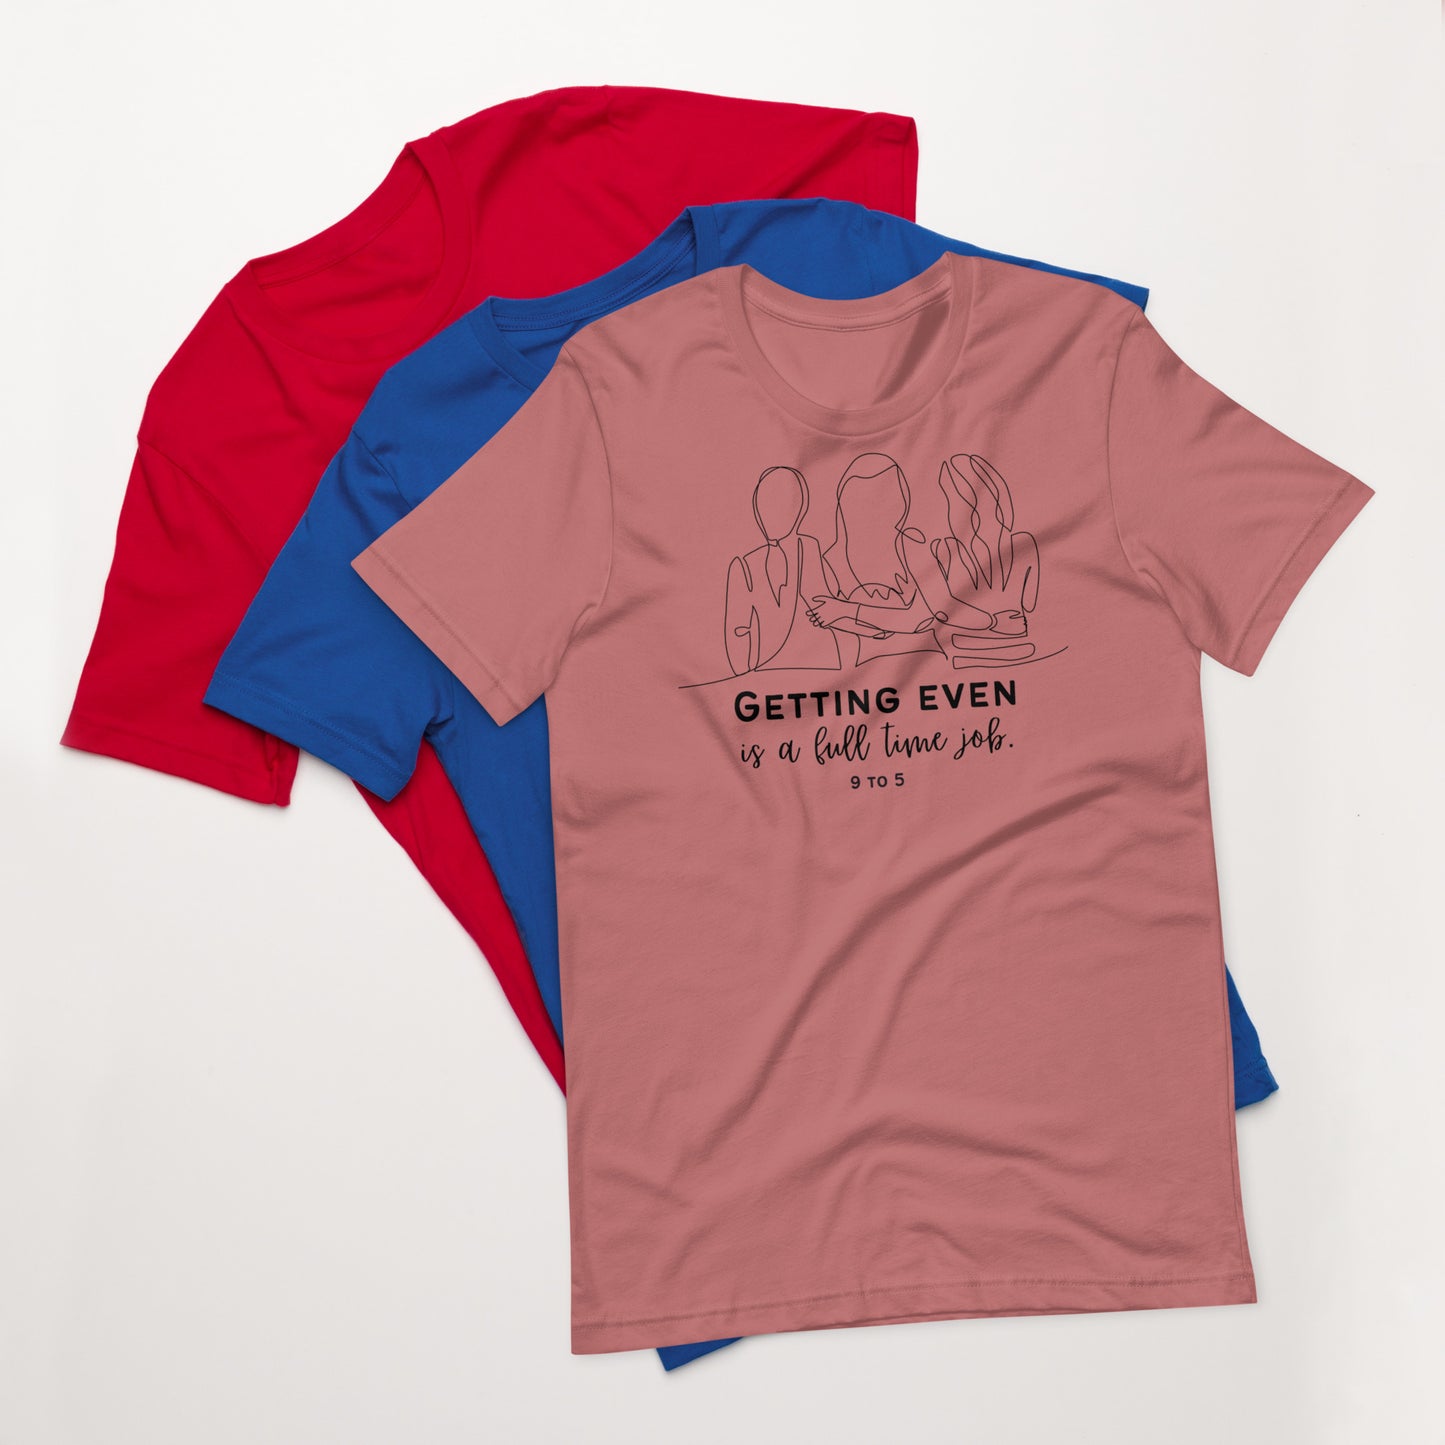 9 to 5 Unisex t-shirt, Getting Even is a Full-Time Job